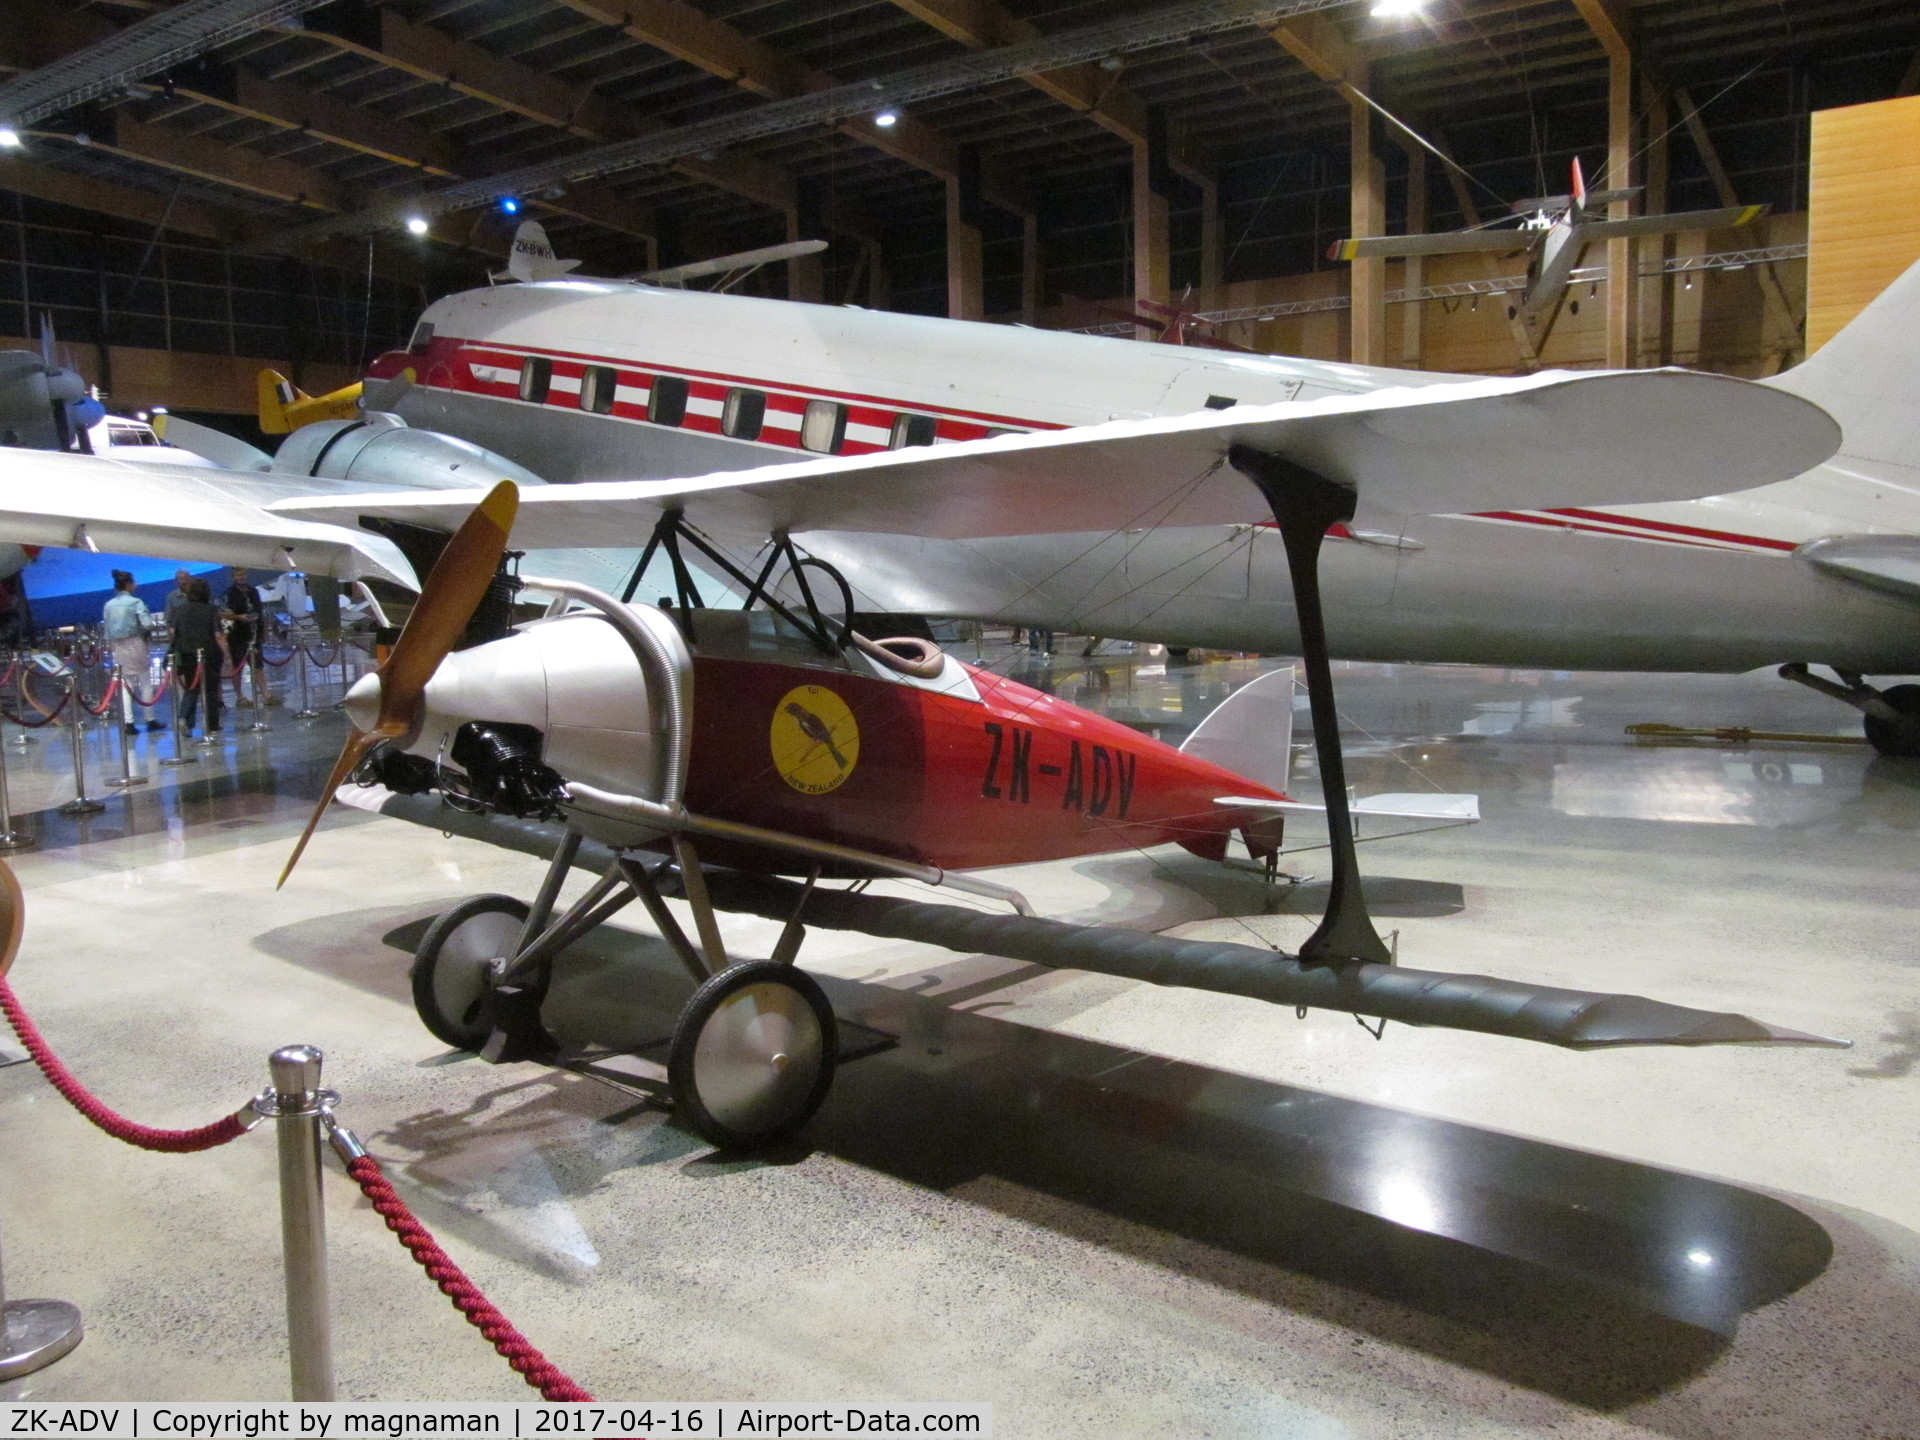 ZK-ADV, 1934 Tui Sports  C/N Not found ZK-ADV, real engine in replica aircraft - nice museum exhibit though - at MOTAT